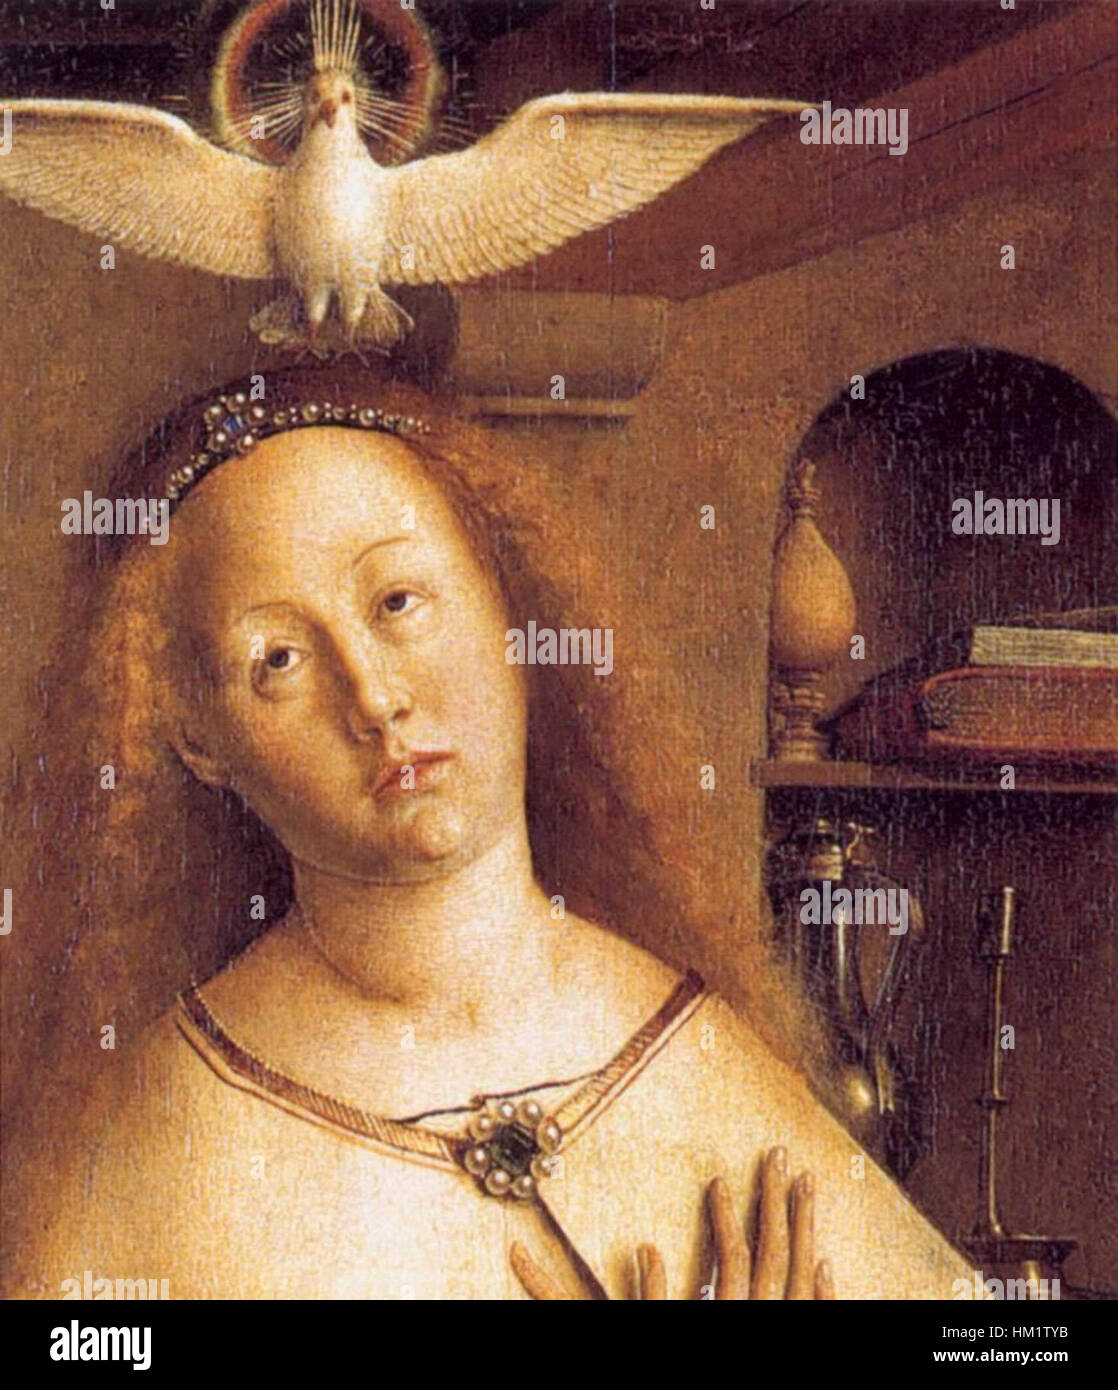 Jan van Eyck - The Ghent Altarpiece - Mary of the Annunciation (detail) - WGA07678 Stock Photo